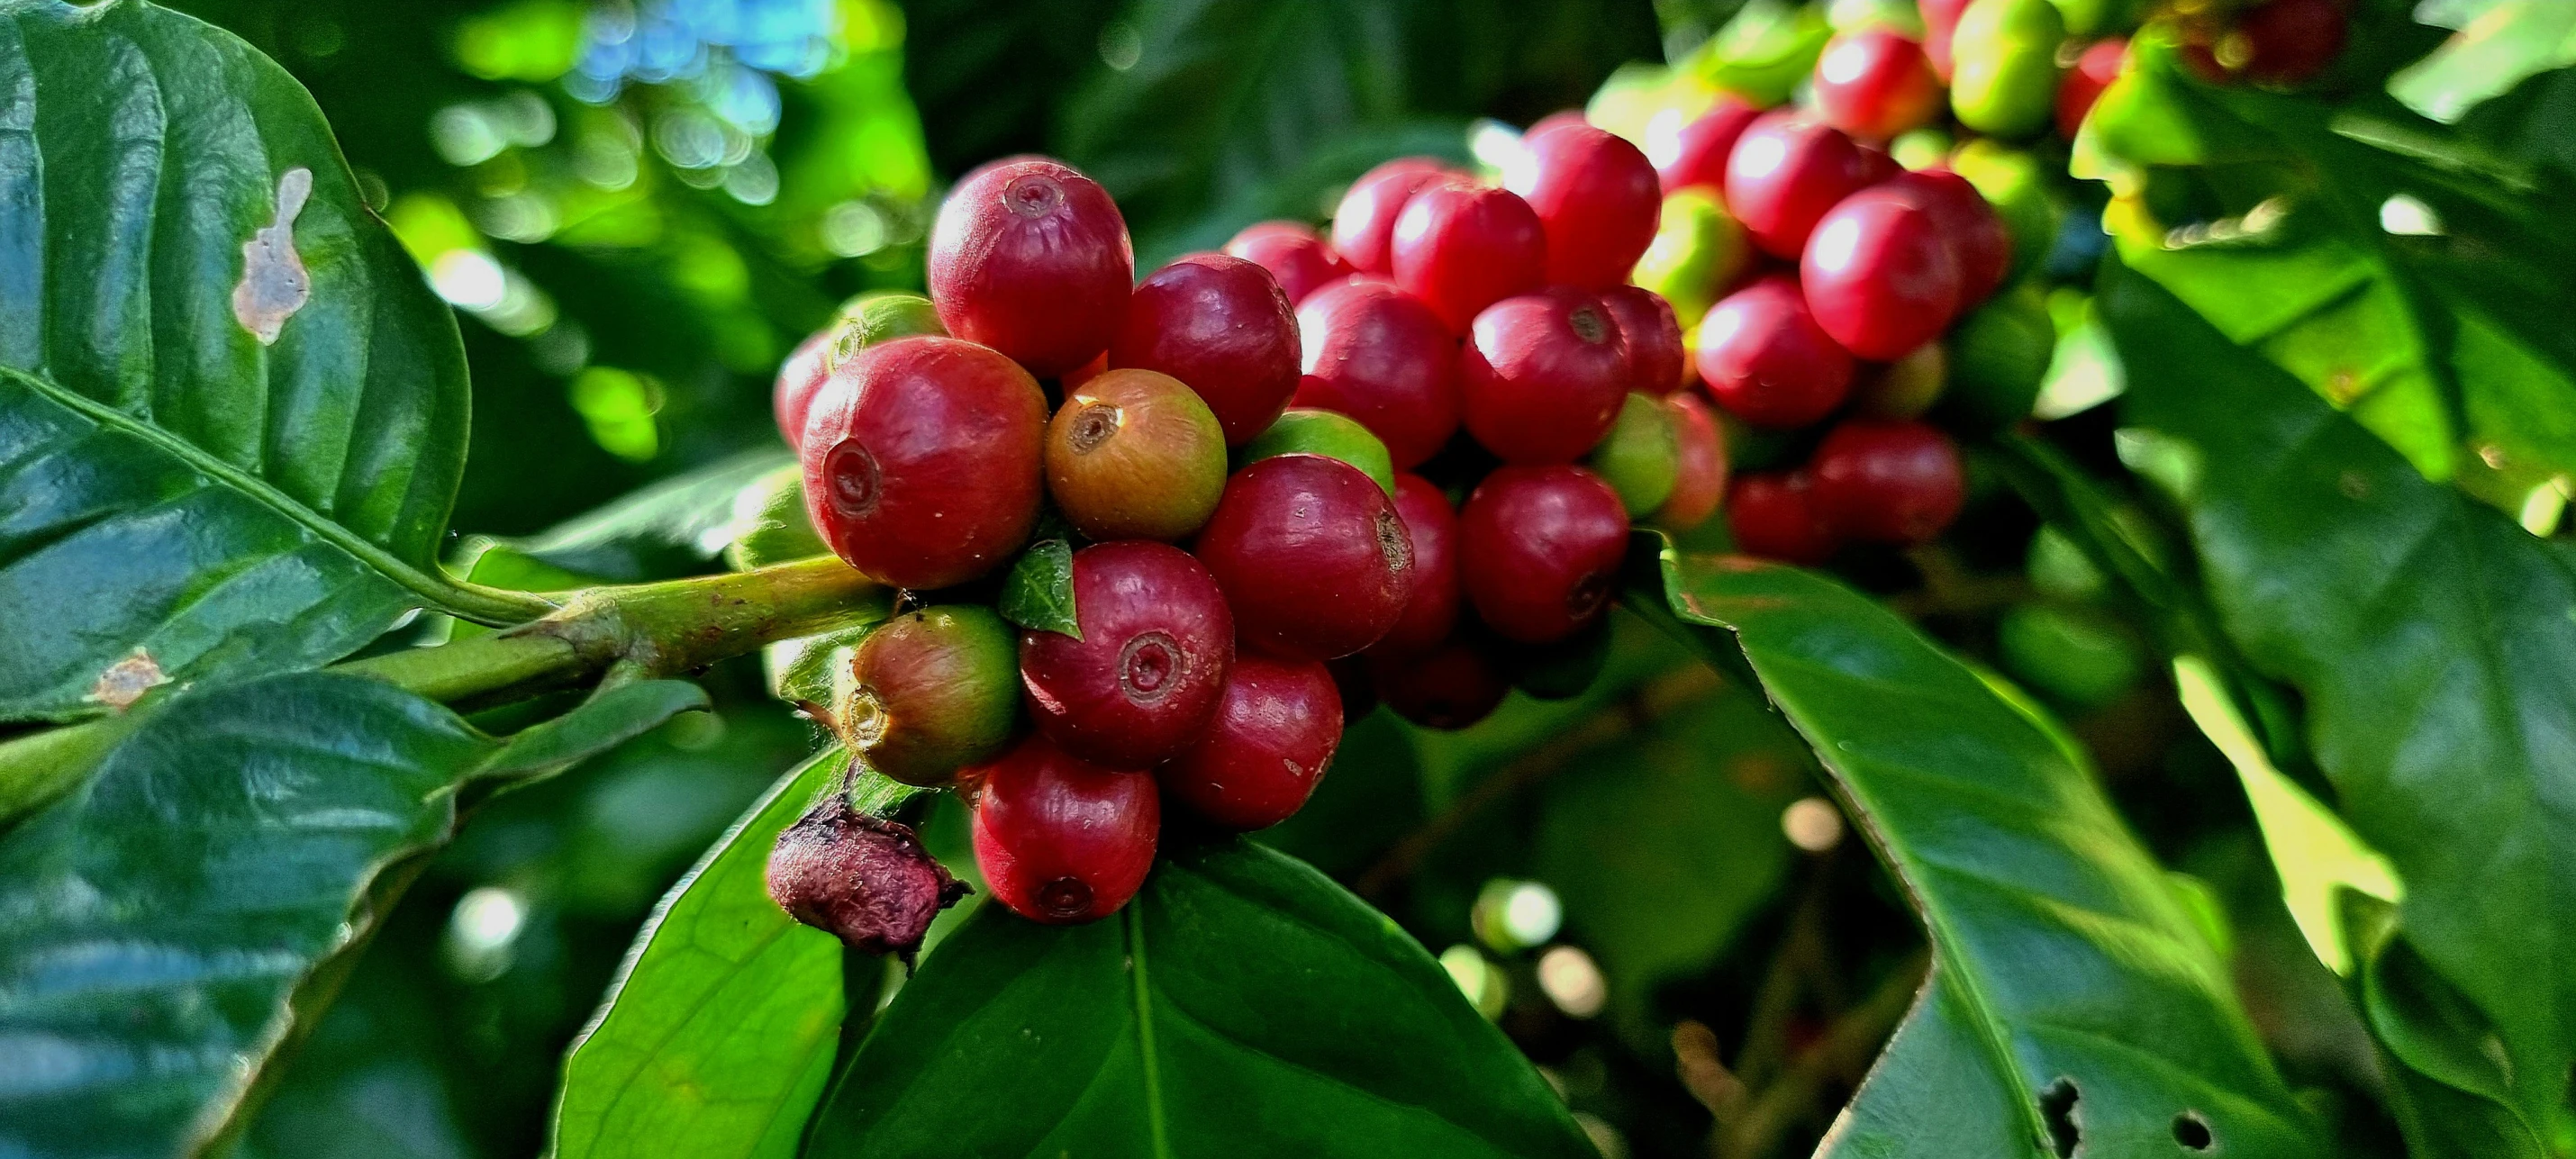 coffee beans on a tree during a sunny day